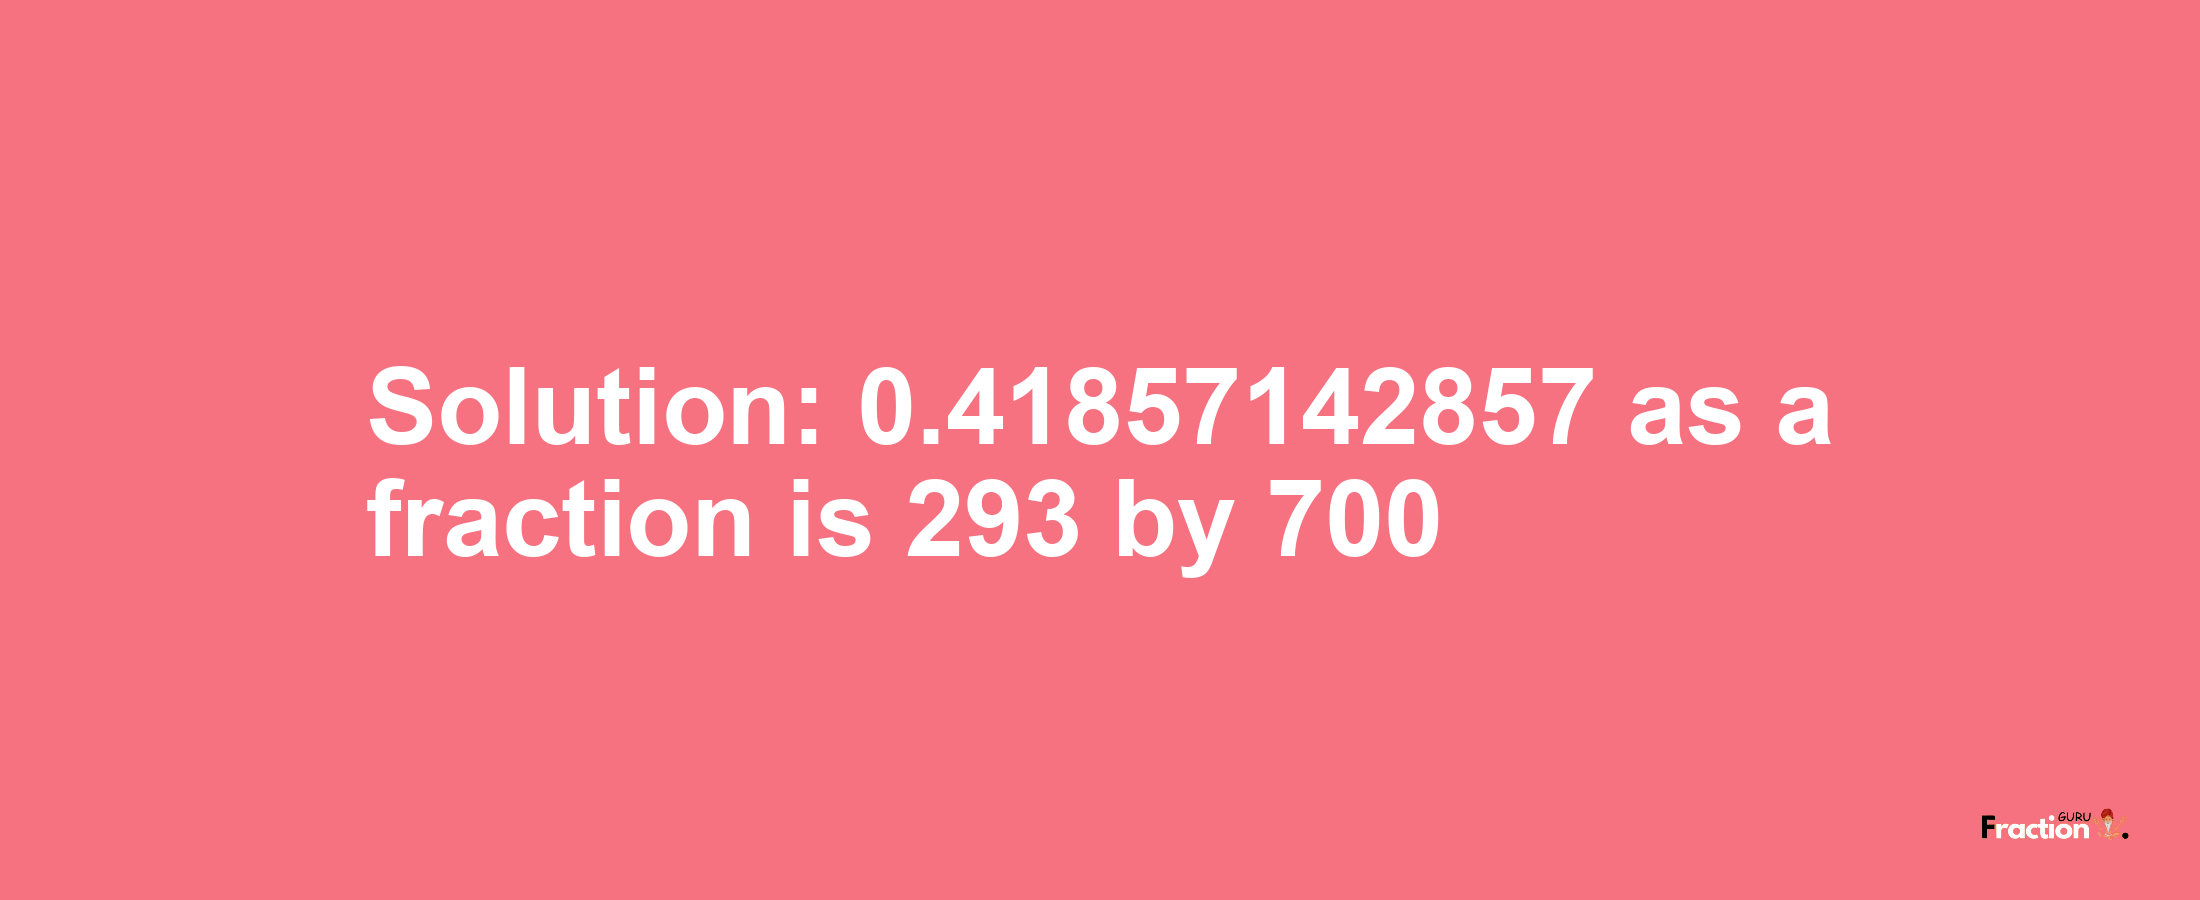 Solution:0.41857142857 as a fraction is 293/700